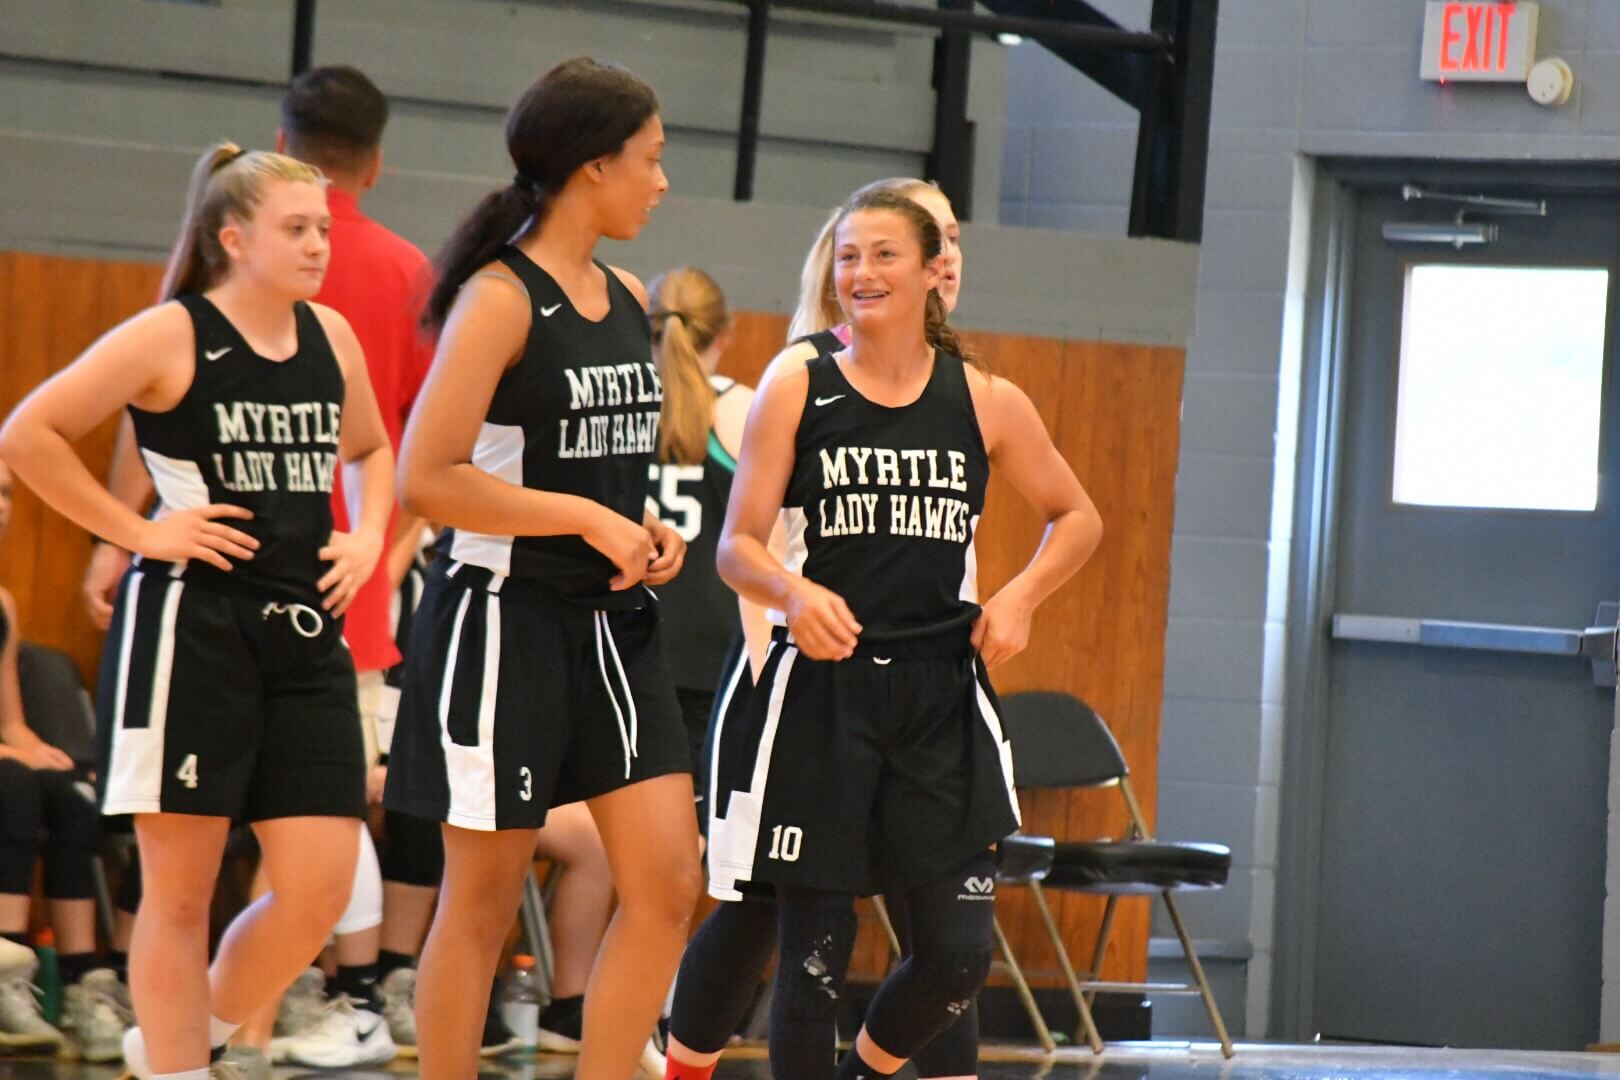 Multiple North MS girls teams compete in Myrtle summer league